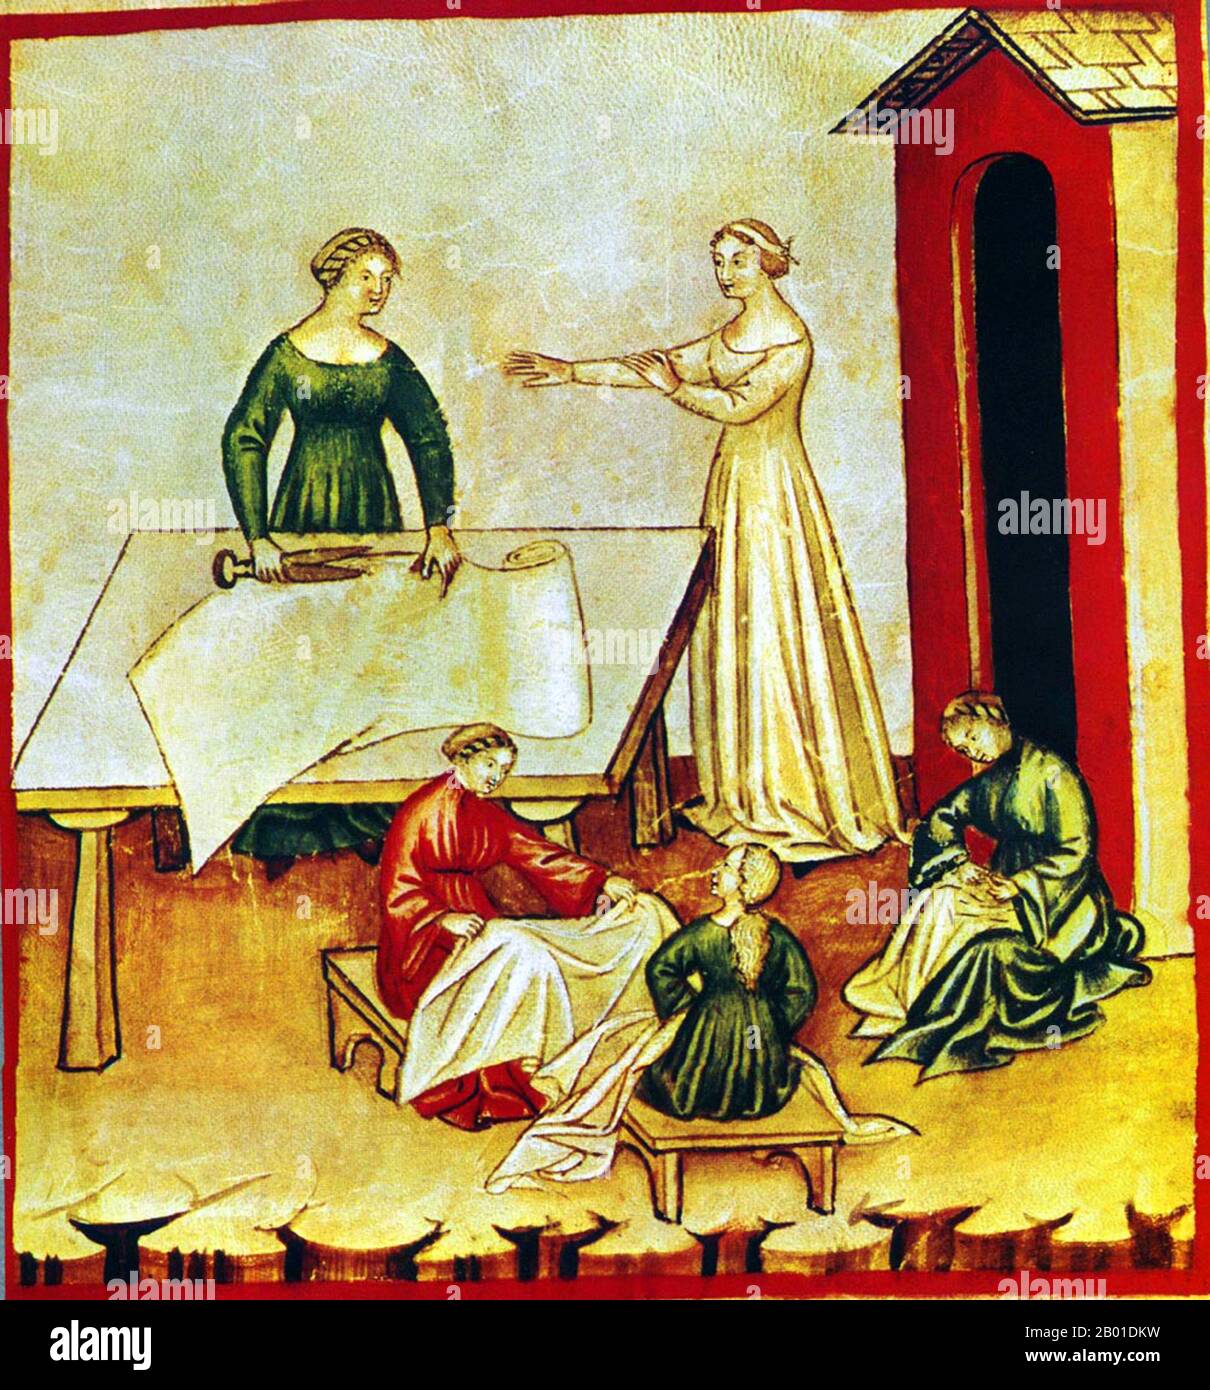 Iraq/Italy: Cutting linen at a tailor's shop. Illustration from Ibn Butlan's Taqwim al-sihha or 'Maintenance of Health', published in Italy as the Tacuinum Sanitatis, 14th century.  The Tacuinum (sometimes Taccuinum) Sanitatis is a medieval handbook on health and wellbeing, based on the Taqwim al‑sihha, an eleventh-century Arab medical treatise by Ibn Butlan of Baghdad.  Ibn Butlân was a Christian physician born in Baghdad and who died in 1068.  He set forth six elements necessary to maintain daily health. Stock Photo